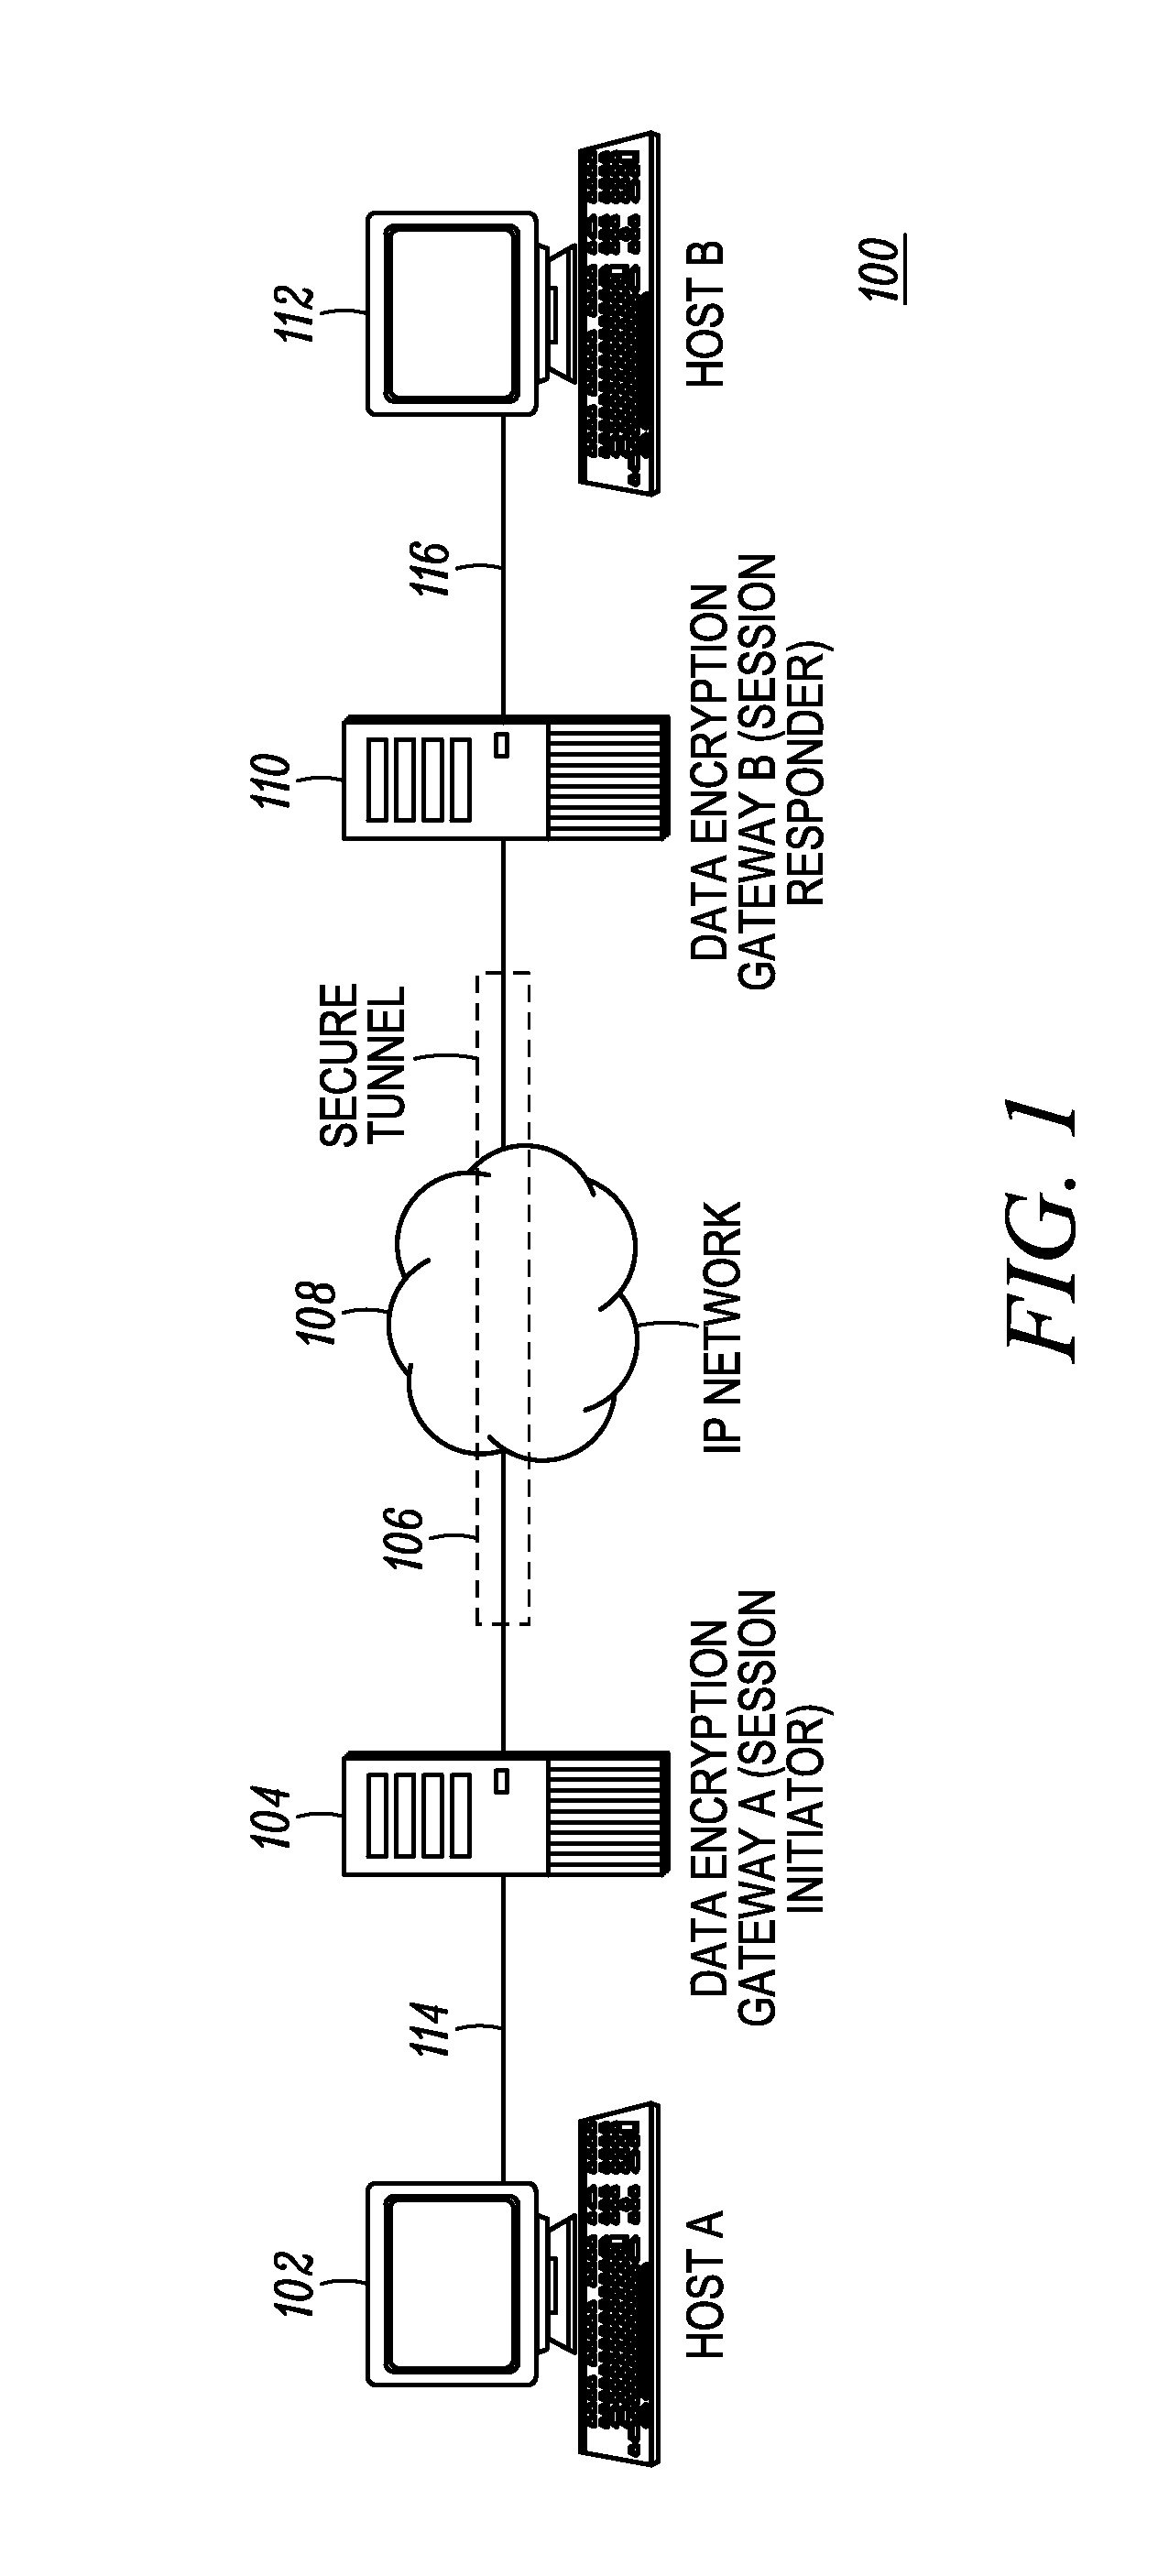 Method for key identification using an internet security association and key management based protocol